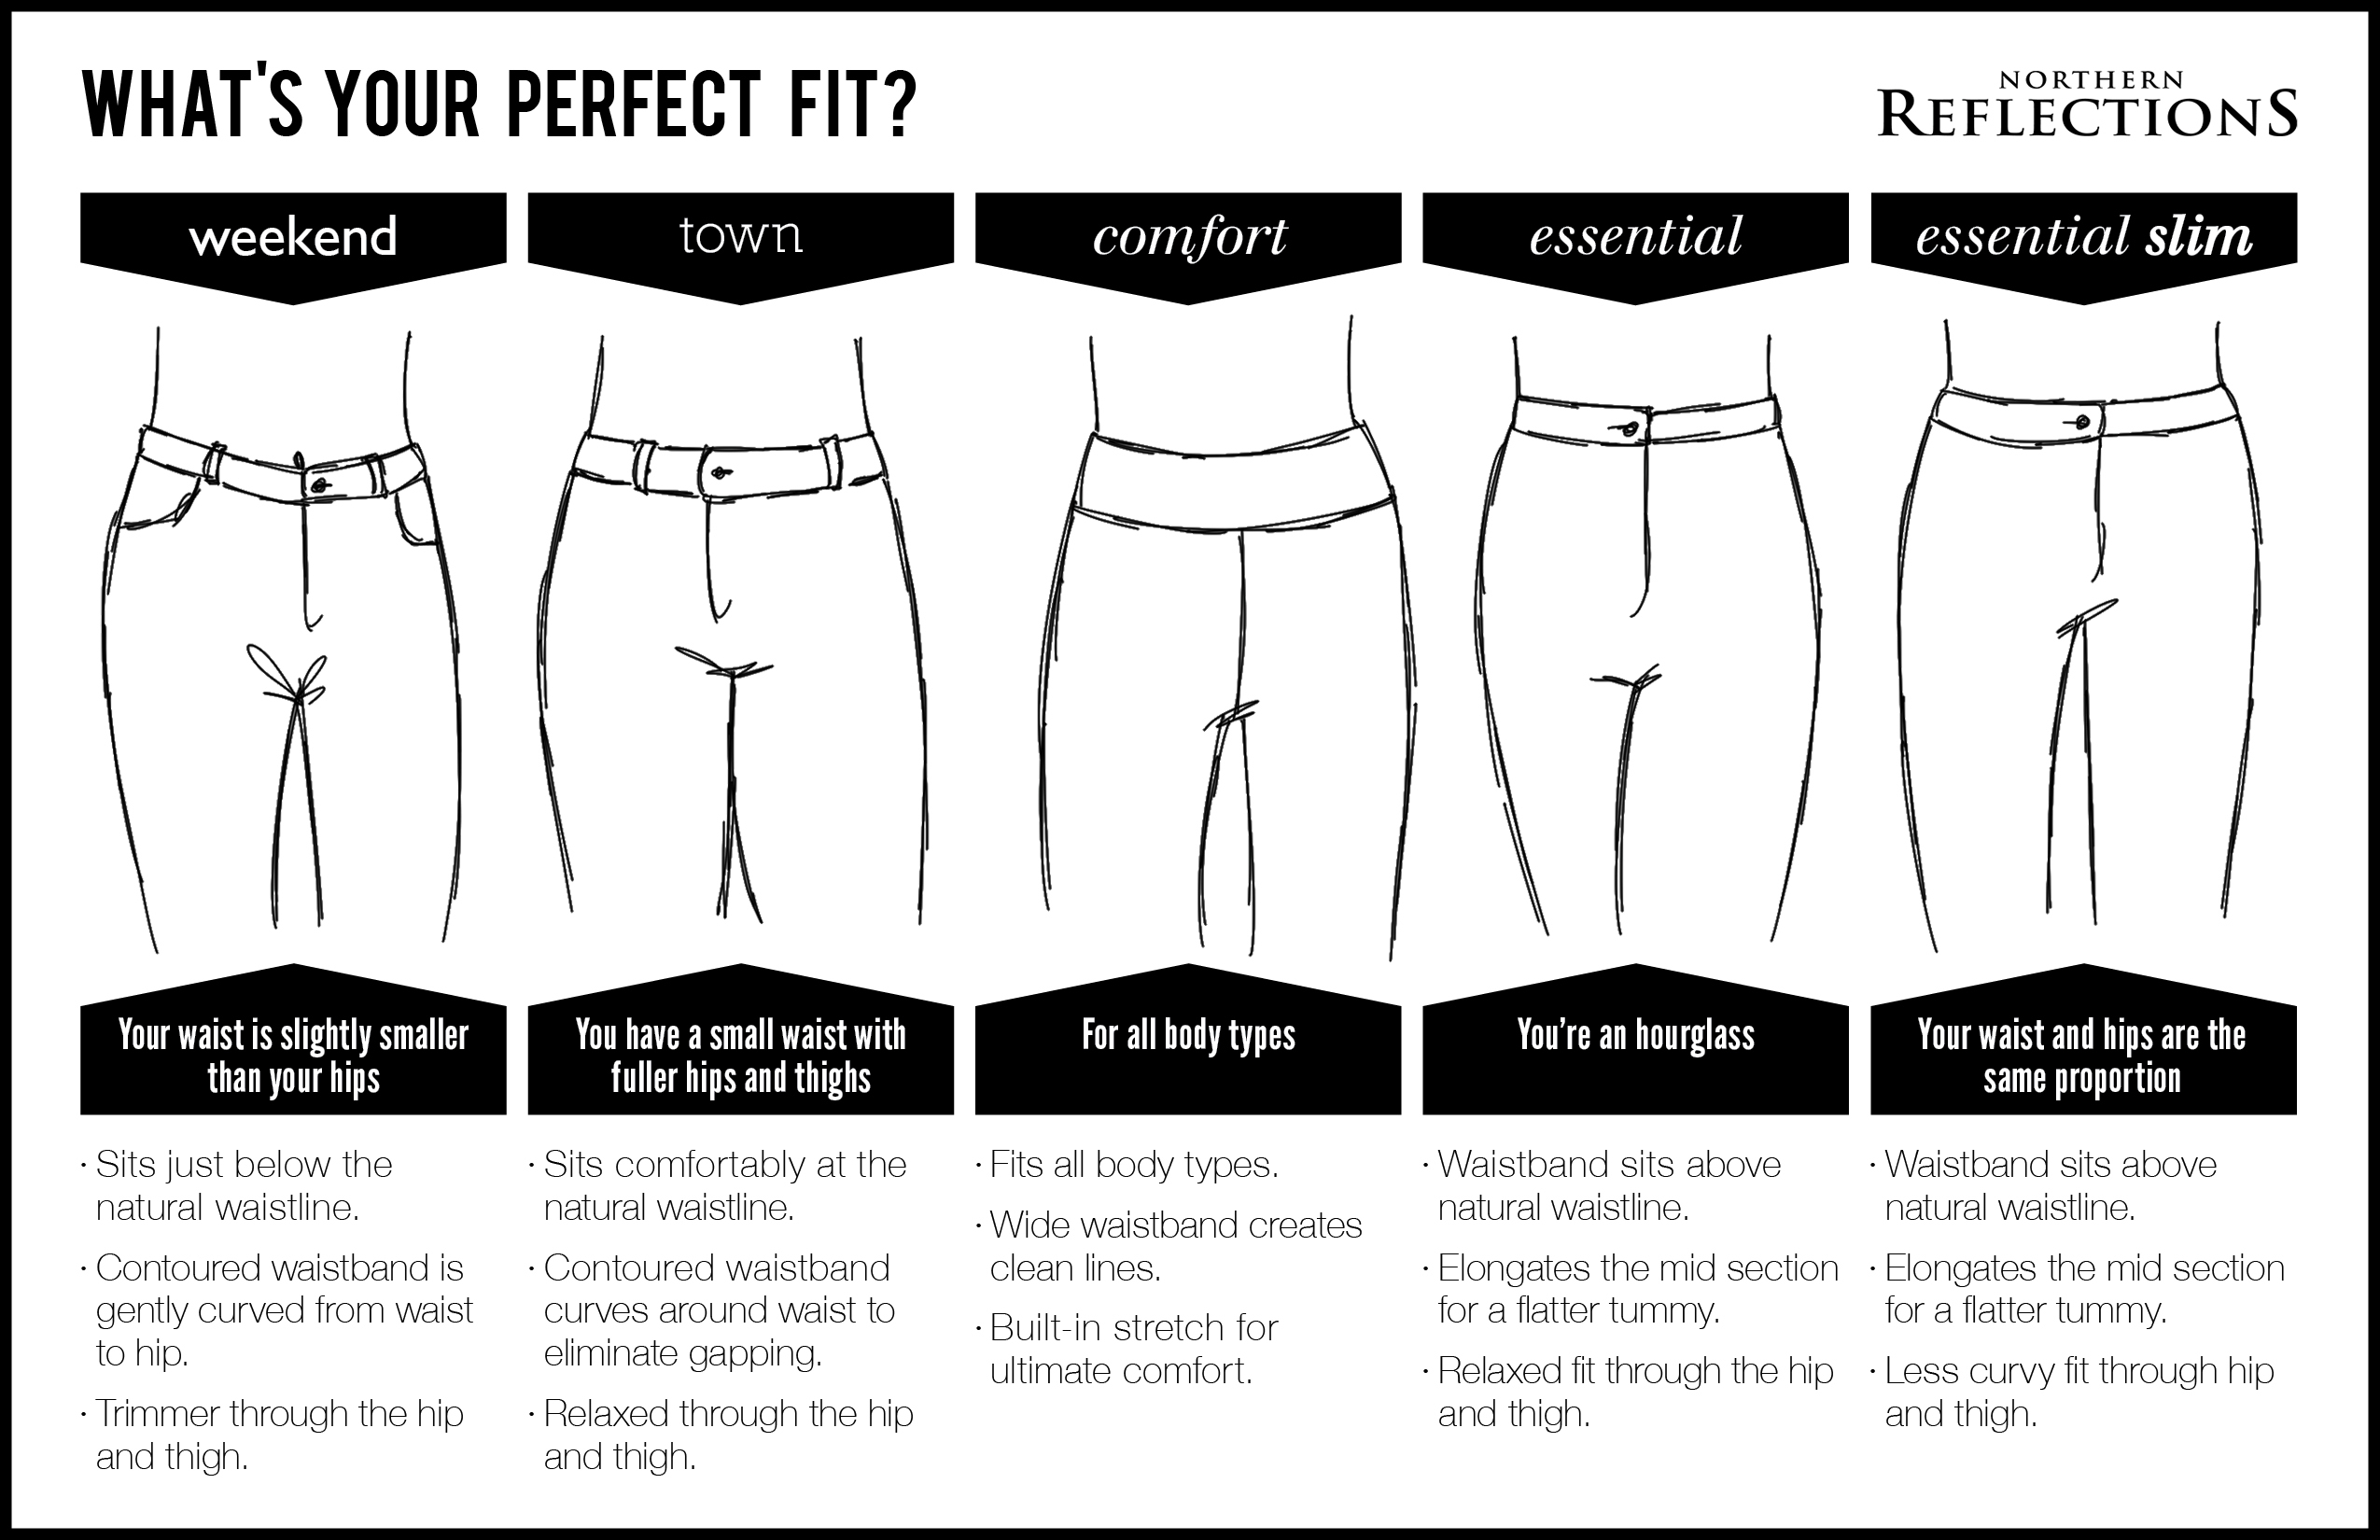 6 Tricks To Know If Your Pants Fit Properly - YouTube